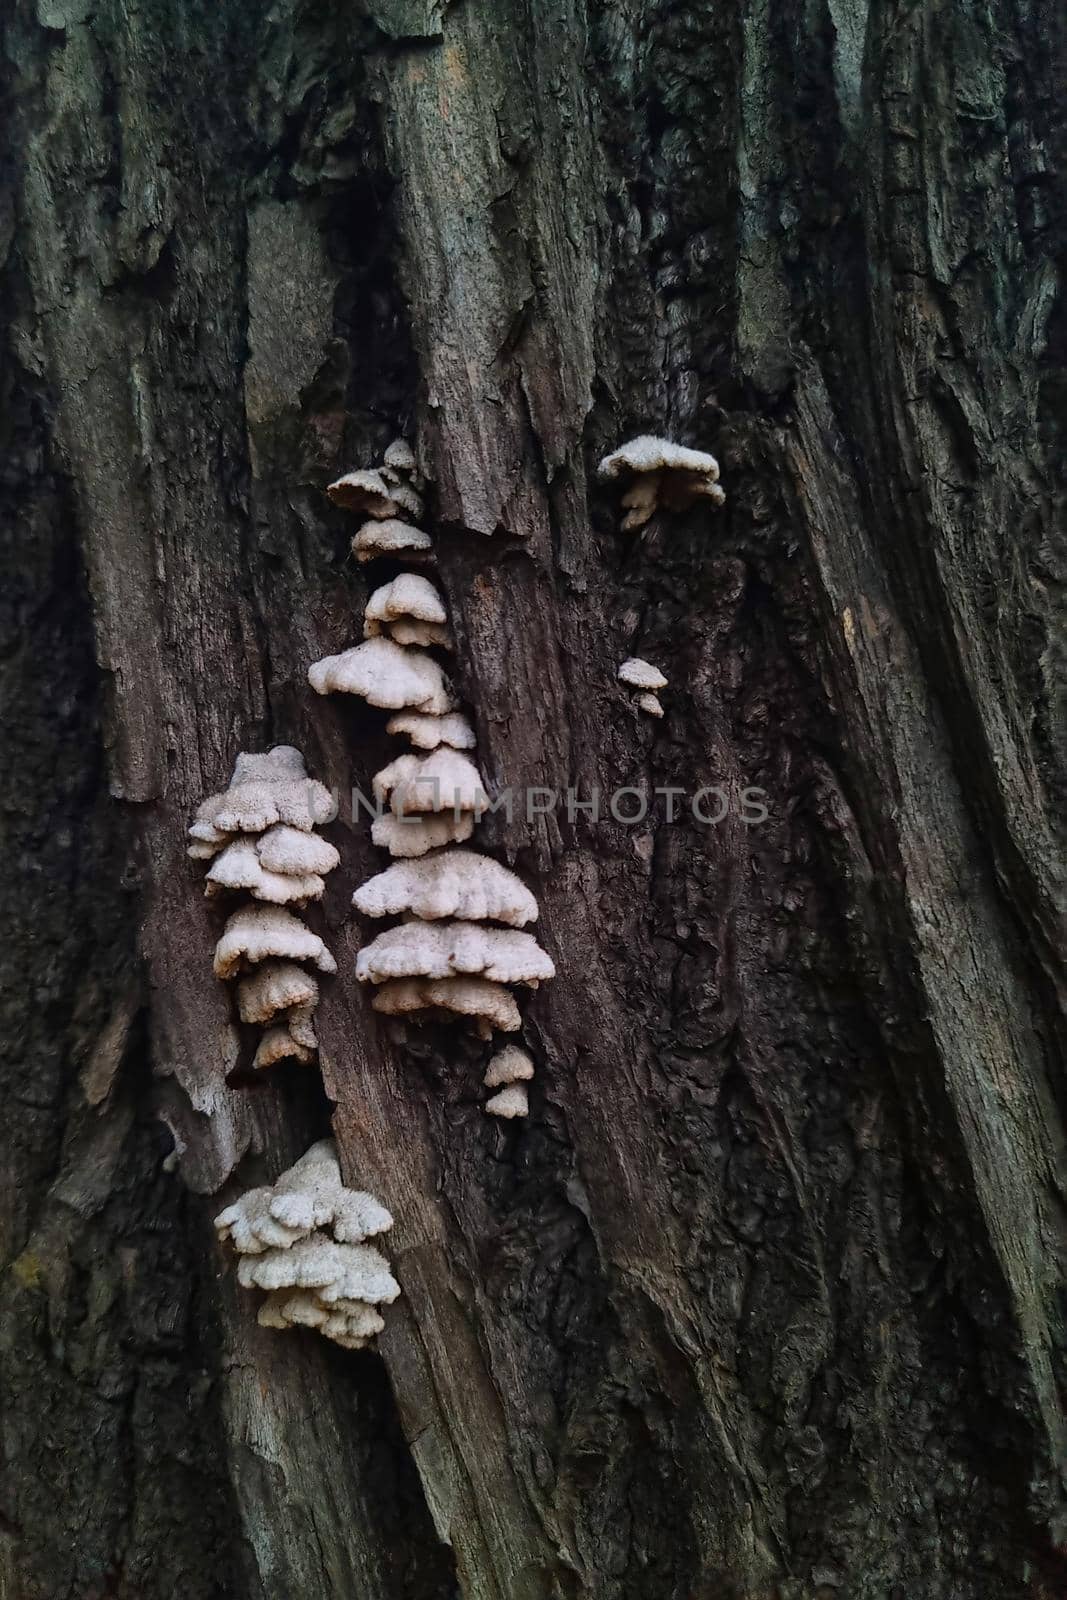 Mushrooms grow on the trunk of the tree in the forest